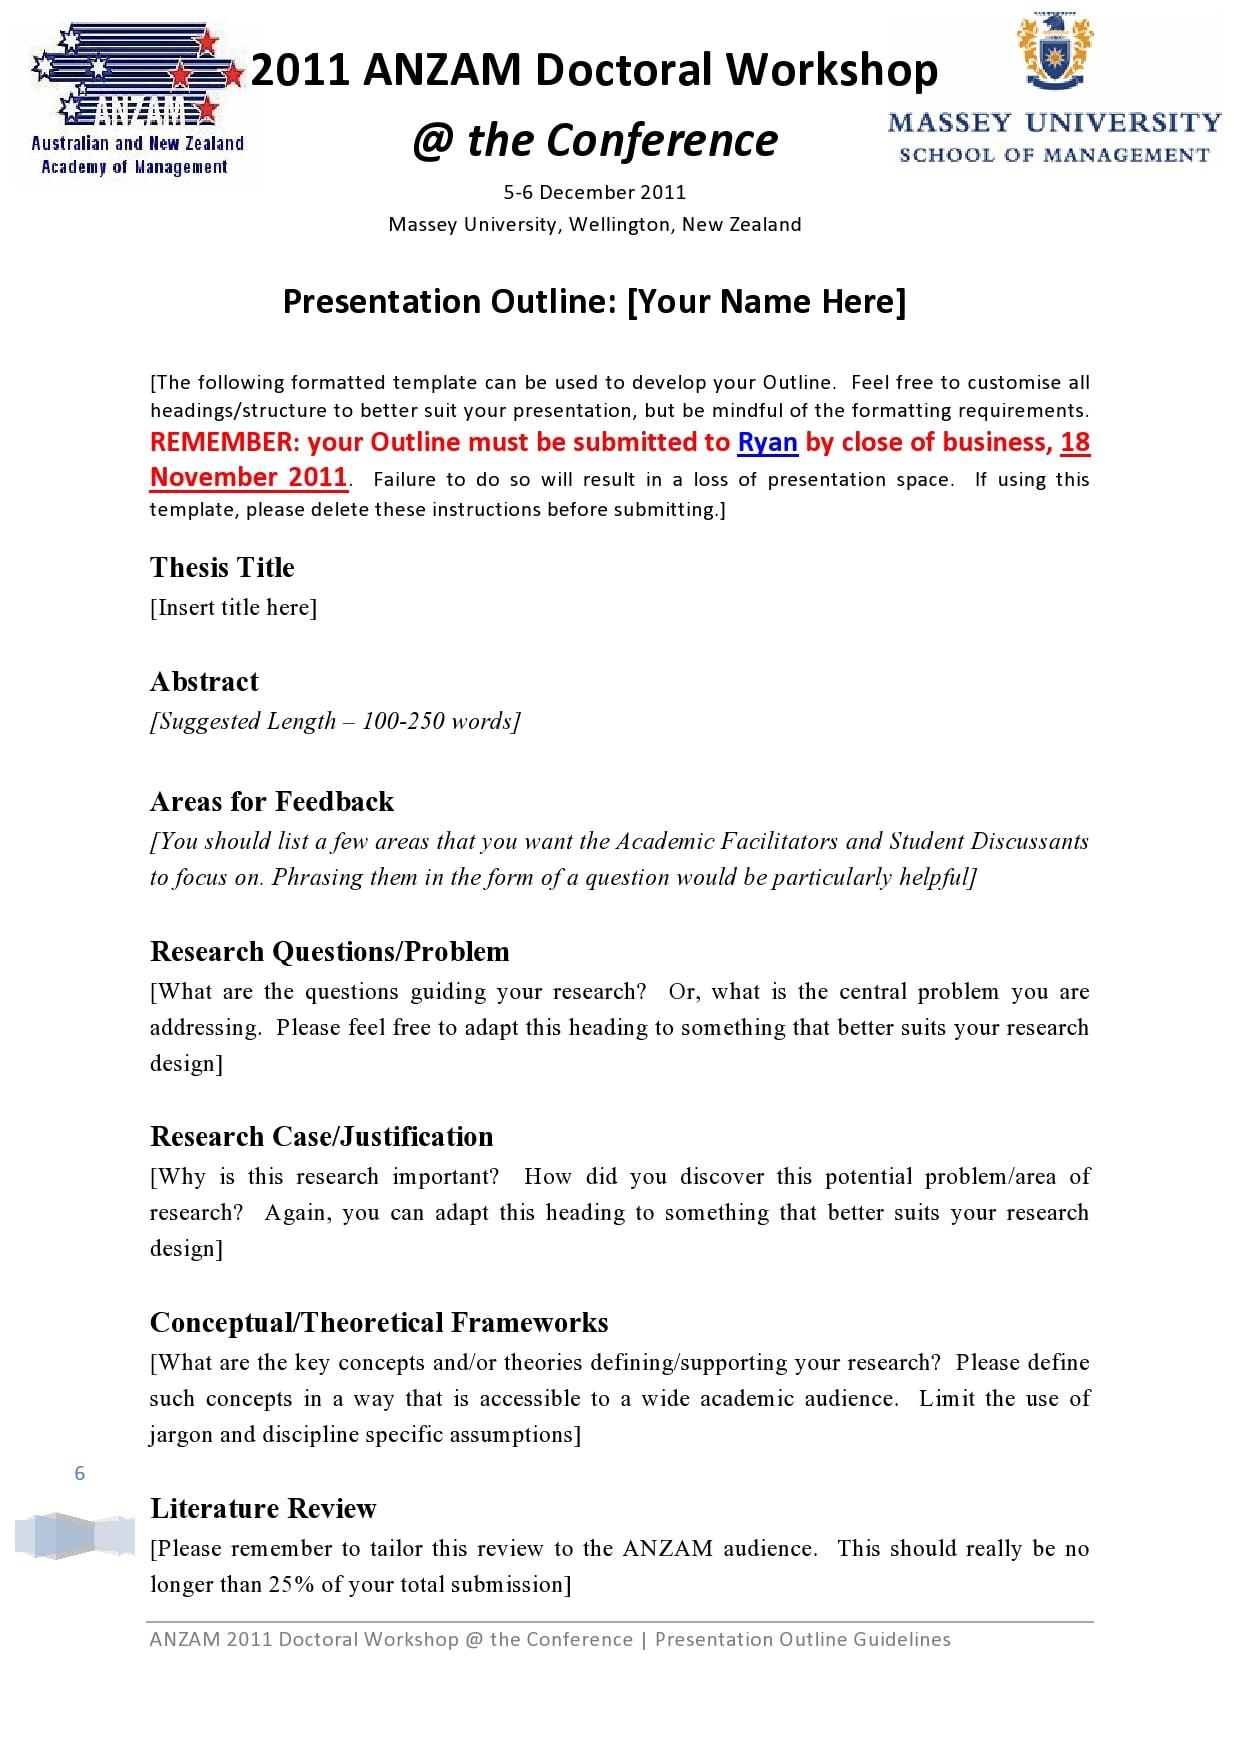 how to present the outline of the presentation